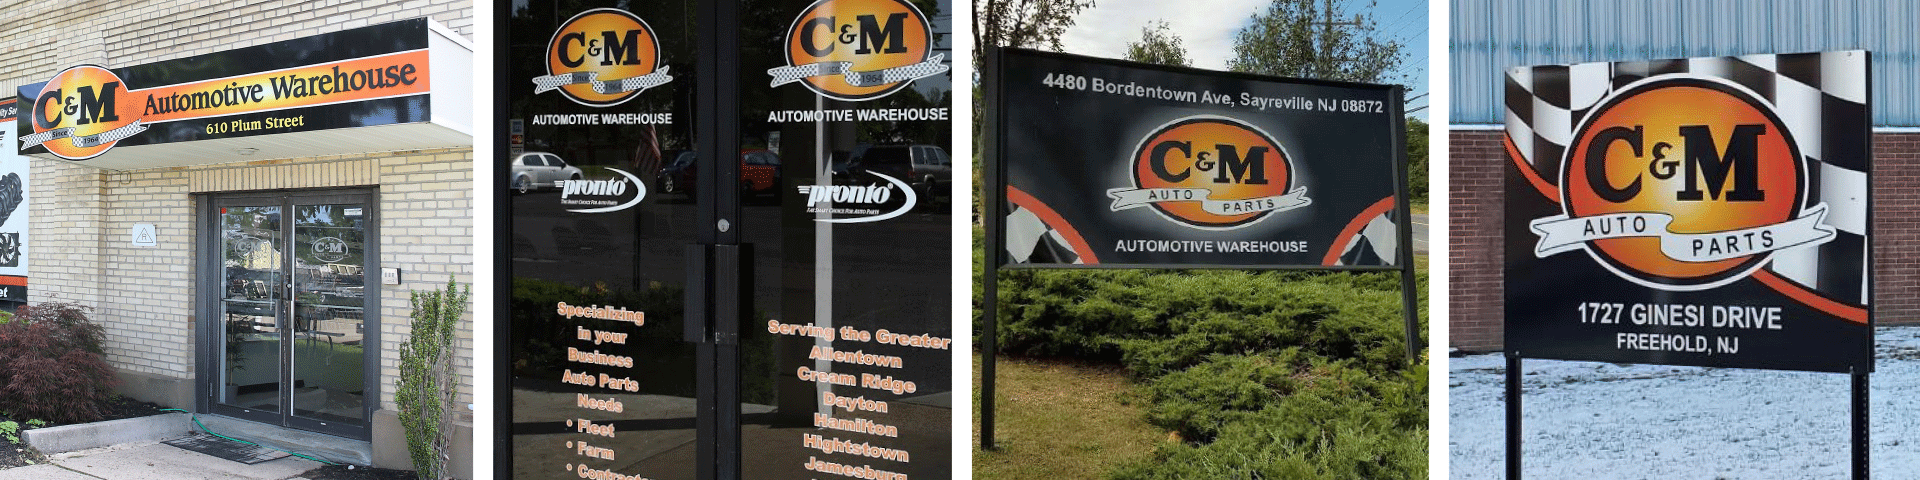 Four C&M Auto Parts – Trenton location entrance, Windsor location glass door entrance, Sayerville Wholesale Warehouse location outdoor signage and auto parts warehouse on Ginesi Drive in Freehold features colorful signage.